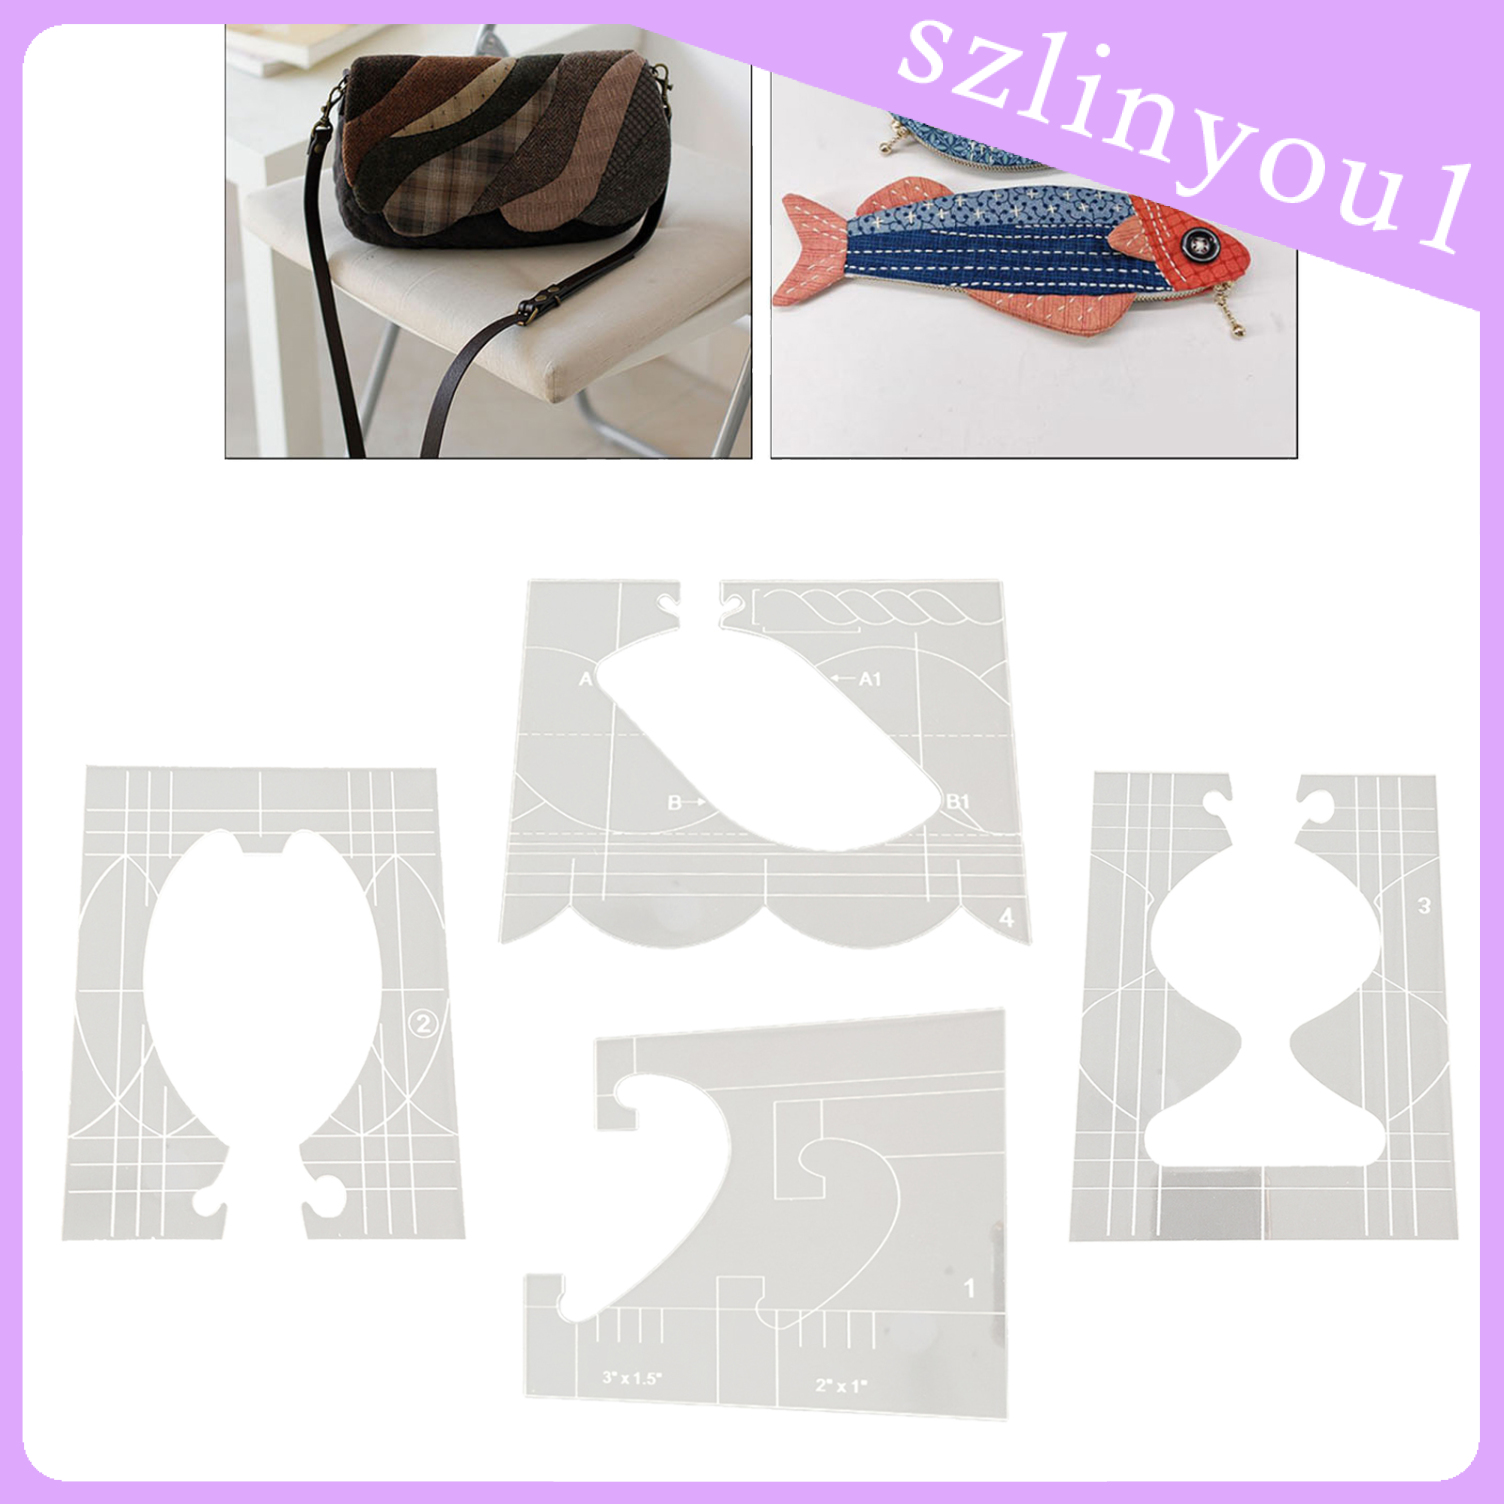 New Arrival Free-Motion Quilting Template Sewing Machine Domestic Templates DIY Quilting Transparent Ruler Quilting Frame for Simple Quilting Designs